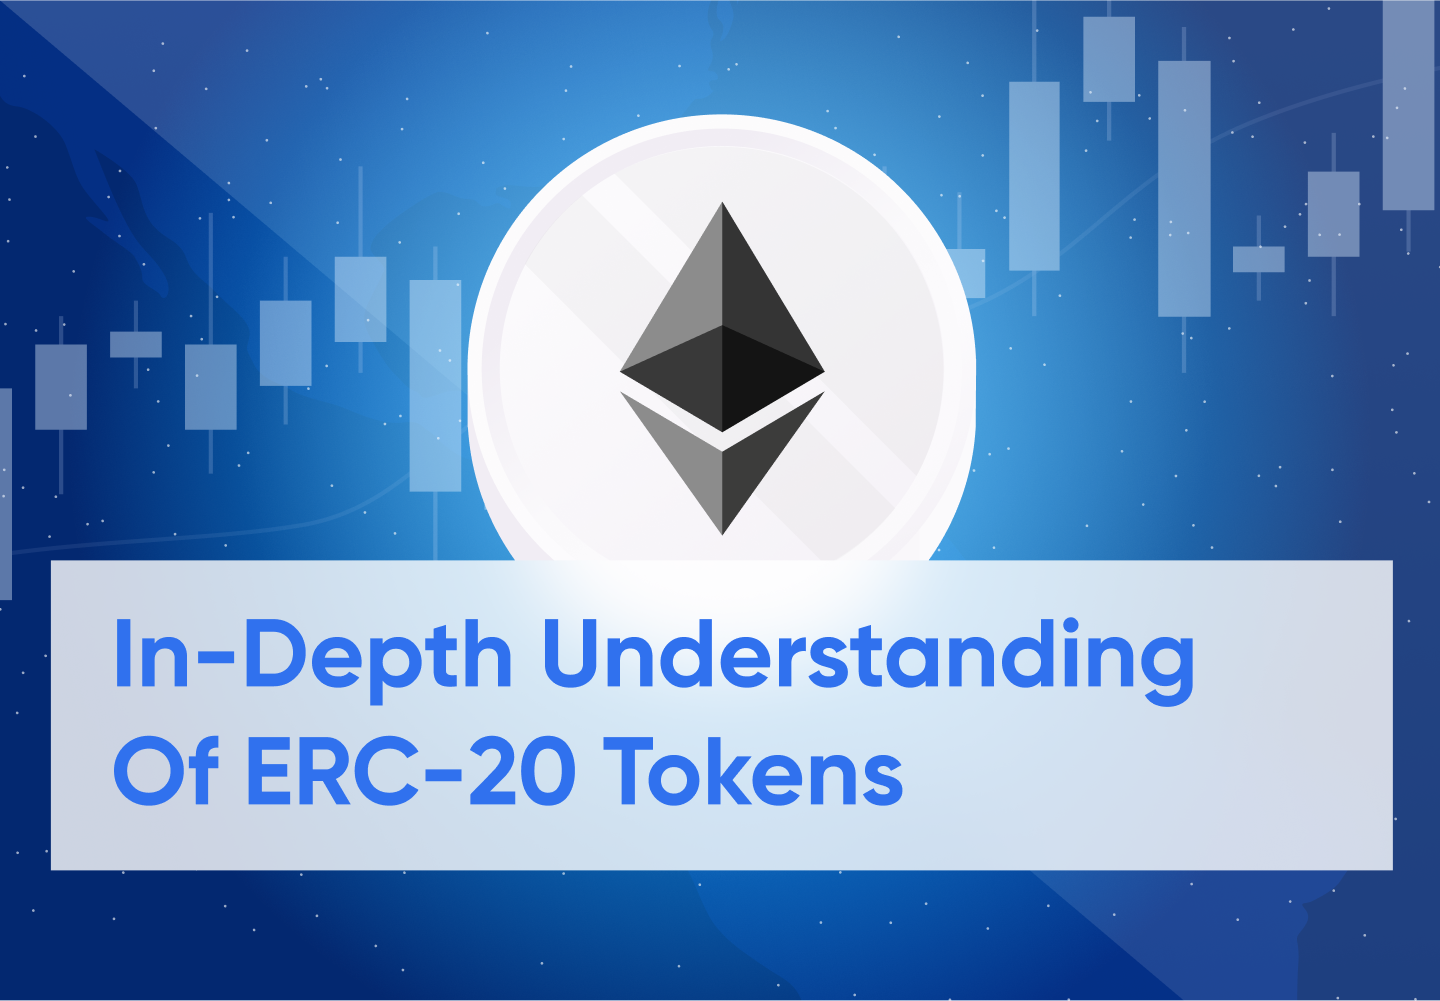 What Are ERC-20 Tokens